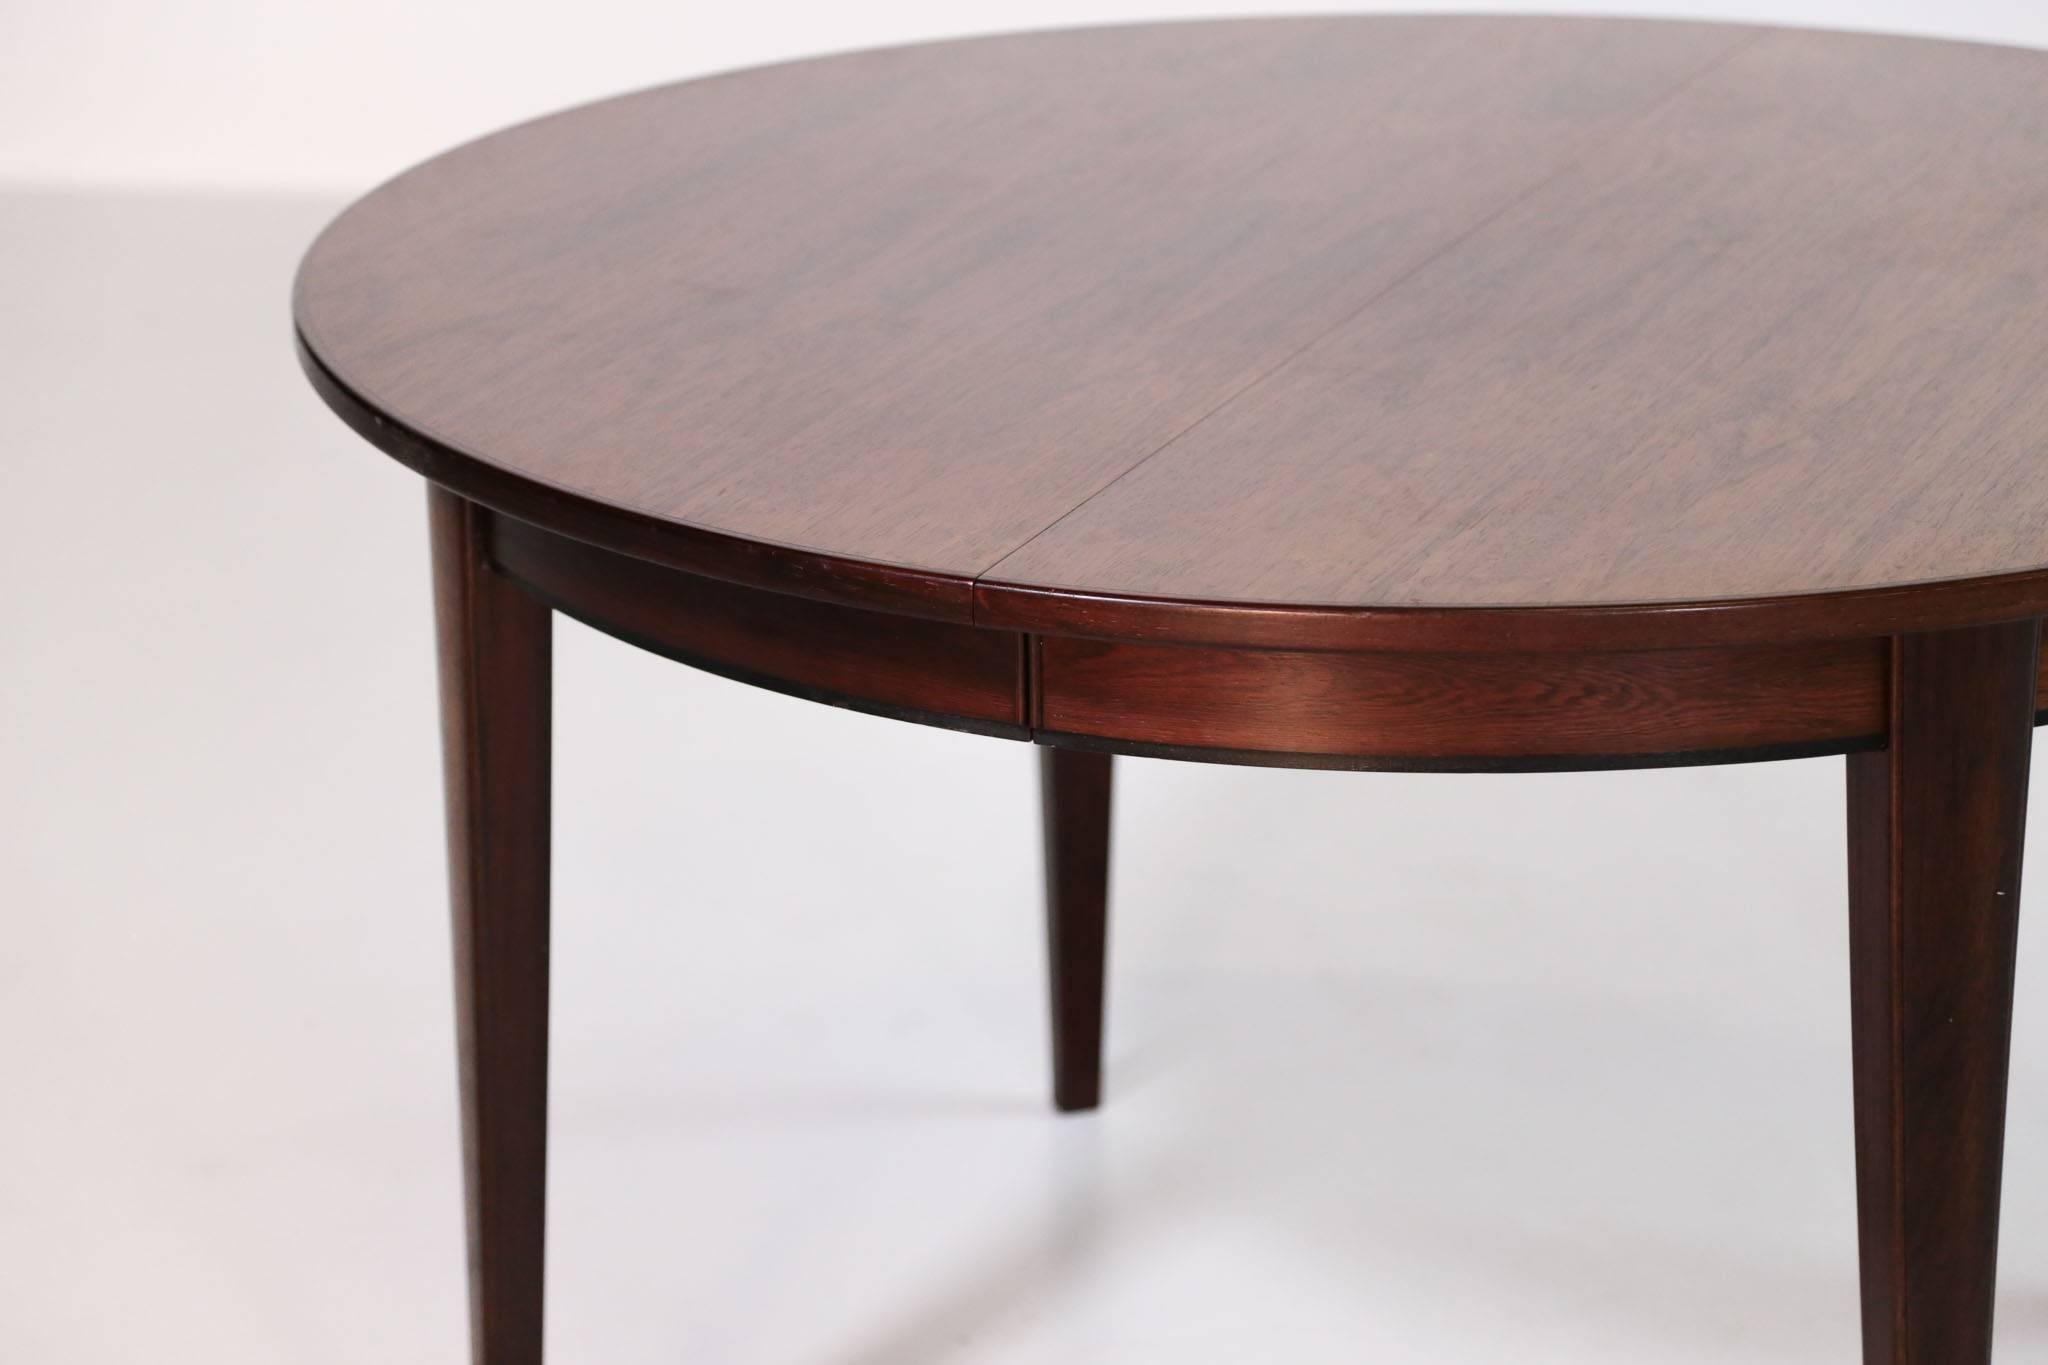 Scandinavian round table in excellent condition, made of rosewood in 1960s
Designed by Gunni Omann
No extension.